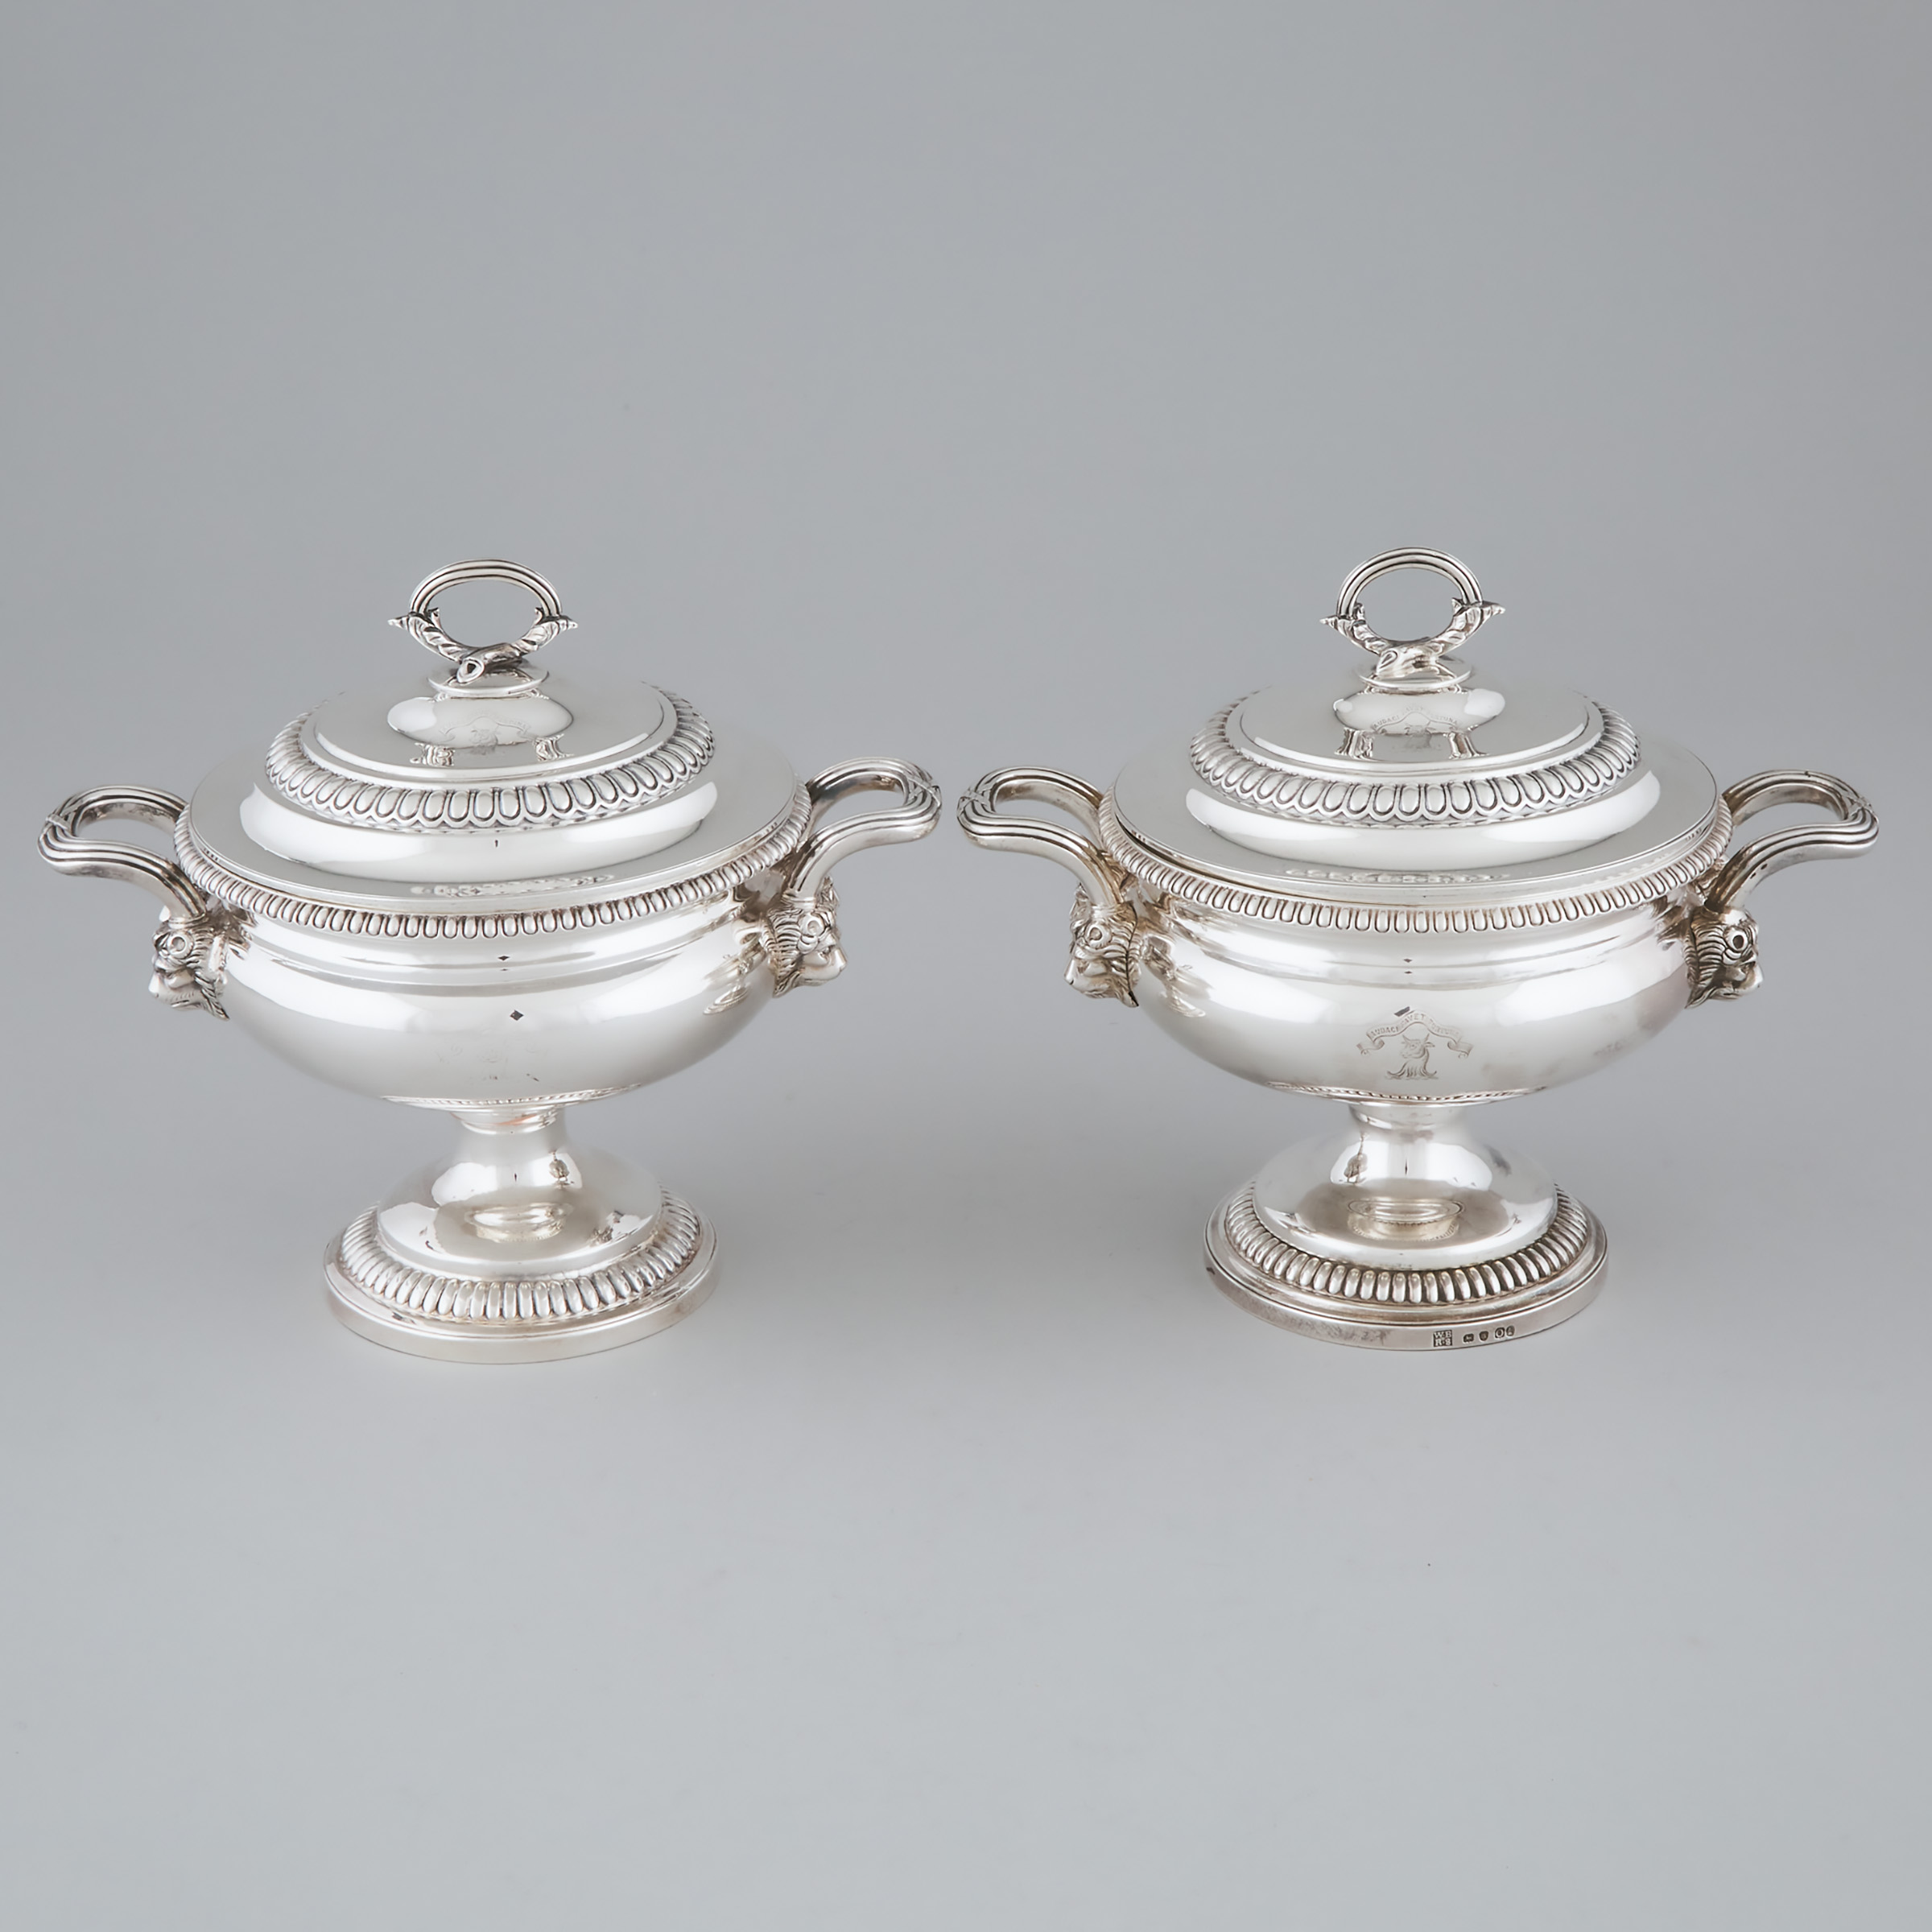 Pair of George III Silver Two-Handled Covered Sauce Tureens, William Burwash & Richard Sibley, London, 1809